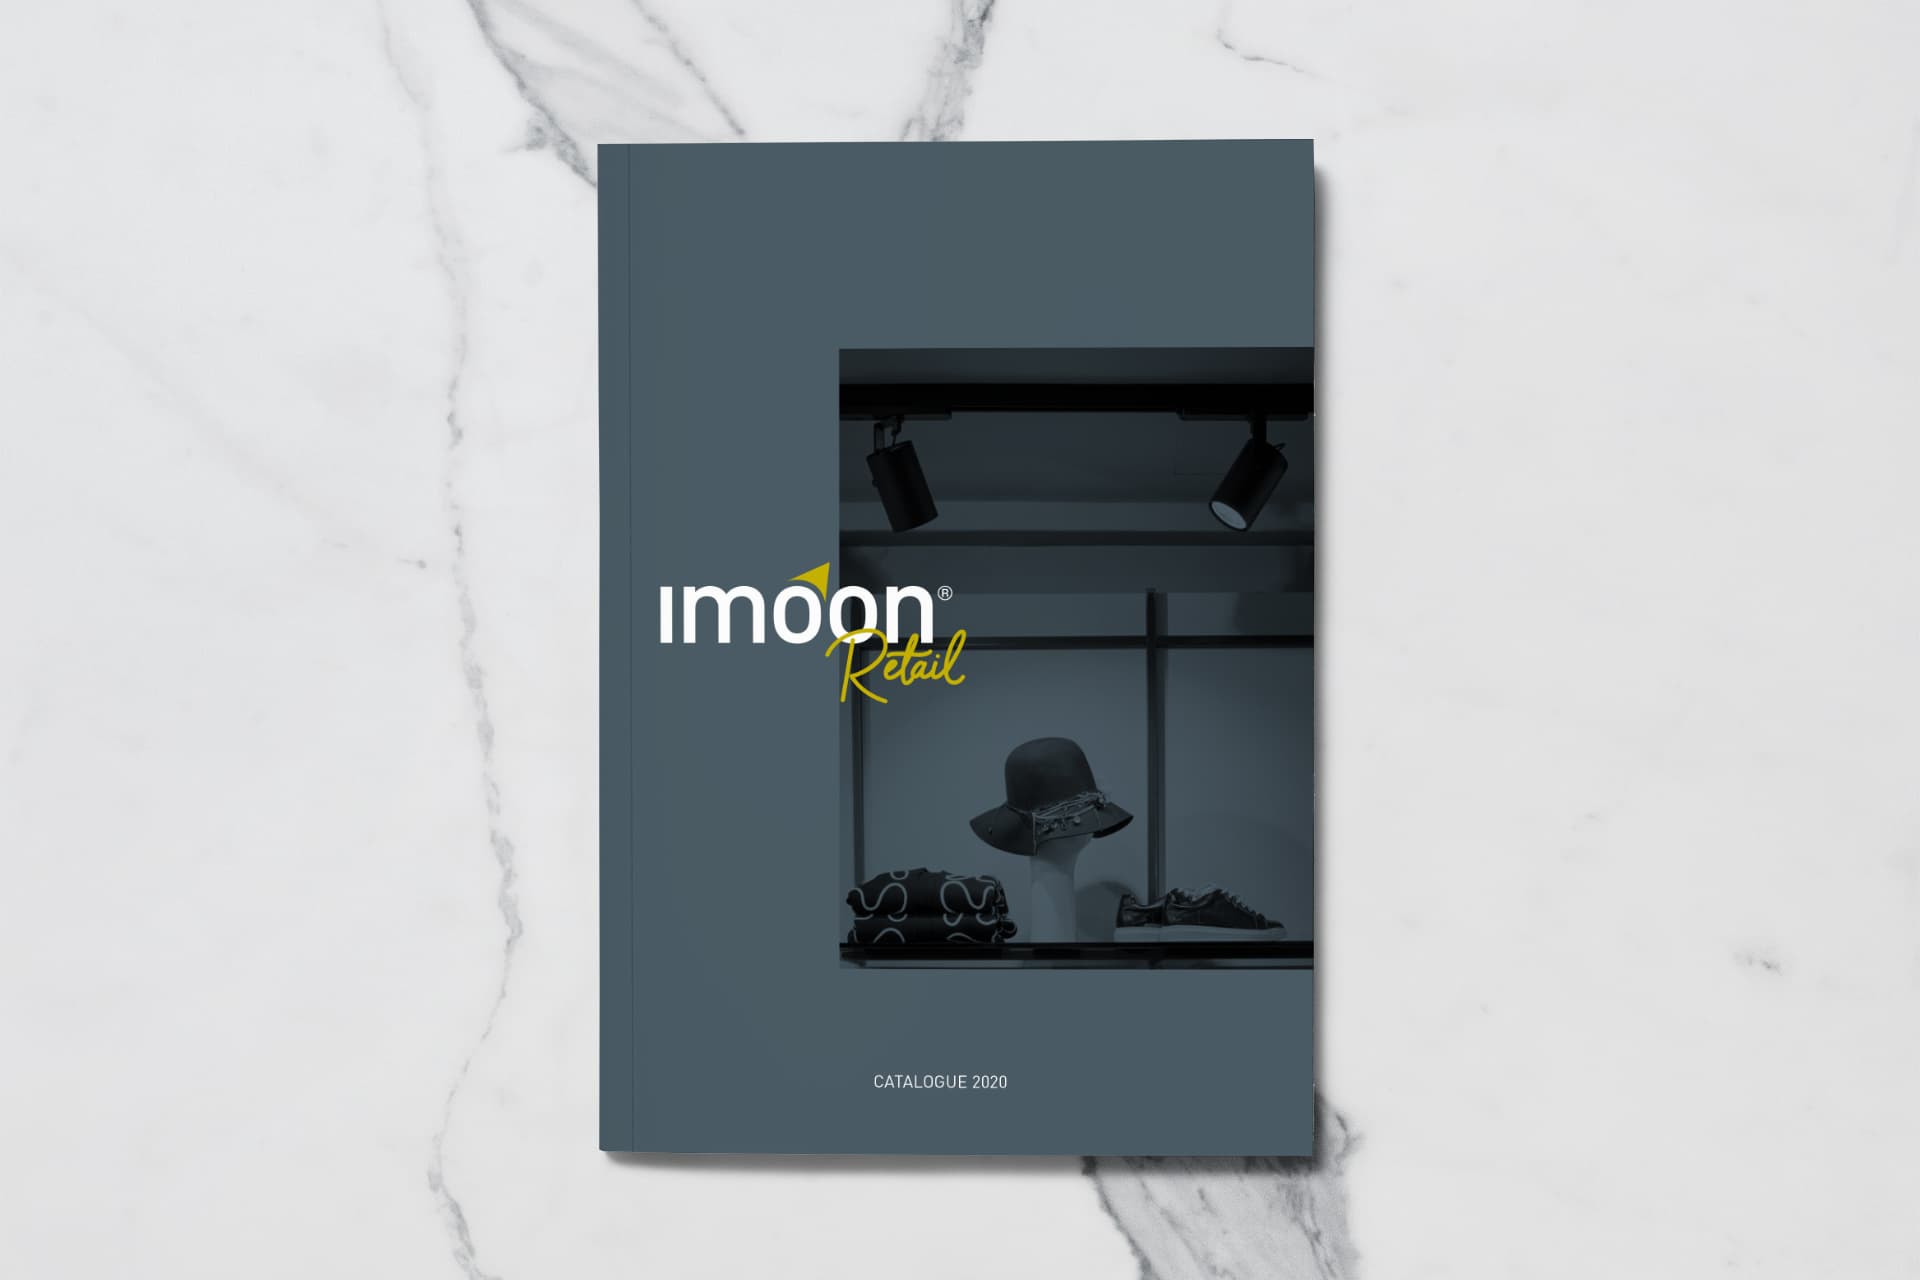 Imoon - Retail & Food, in a different light